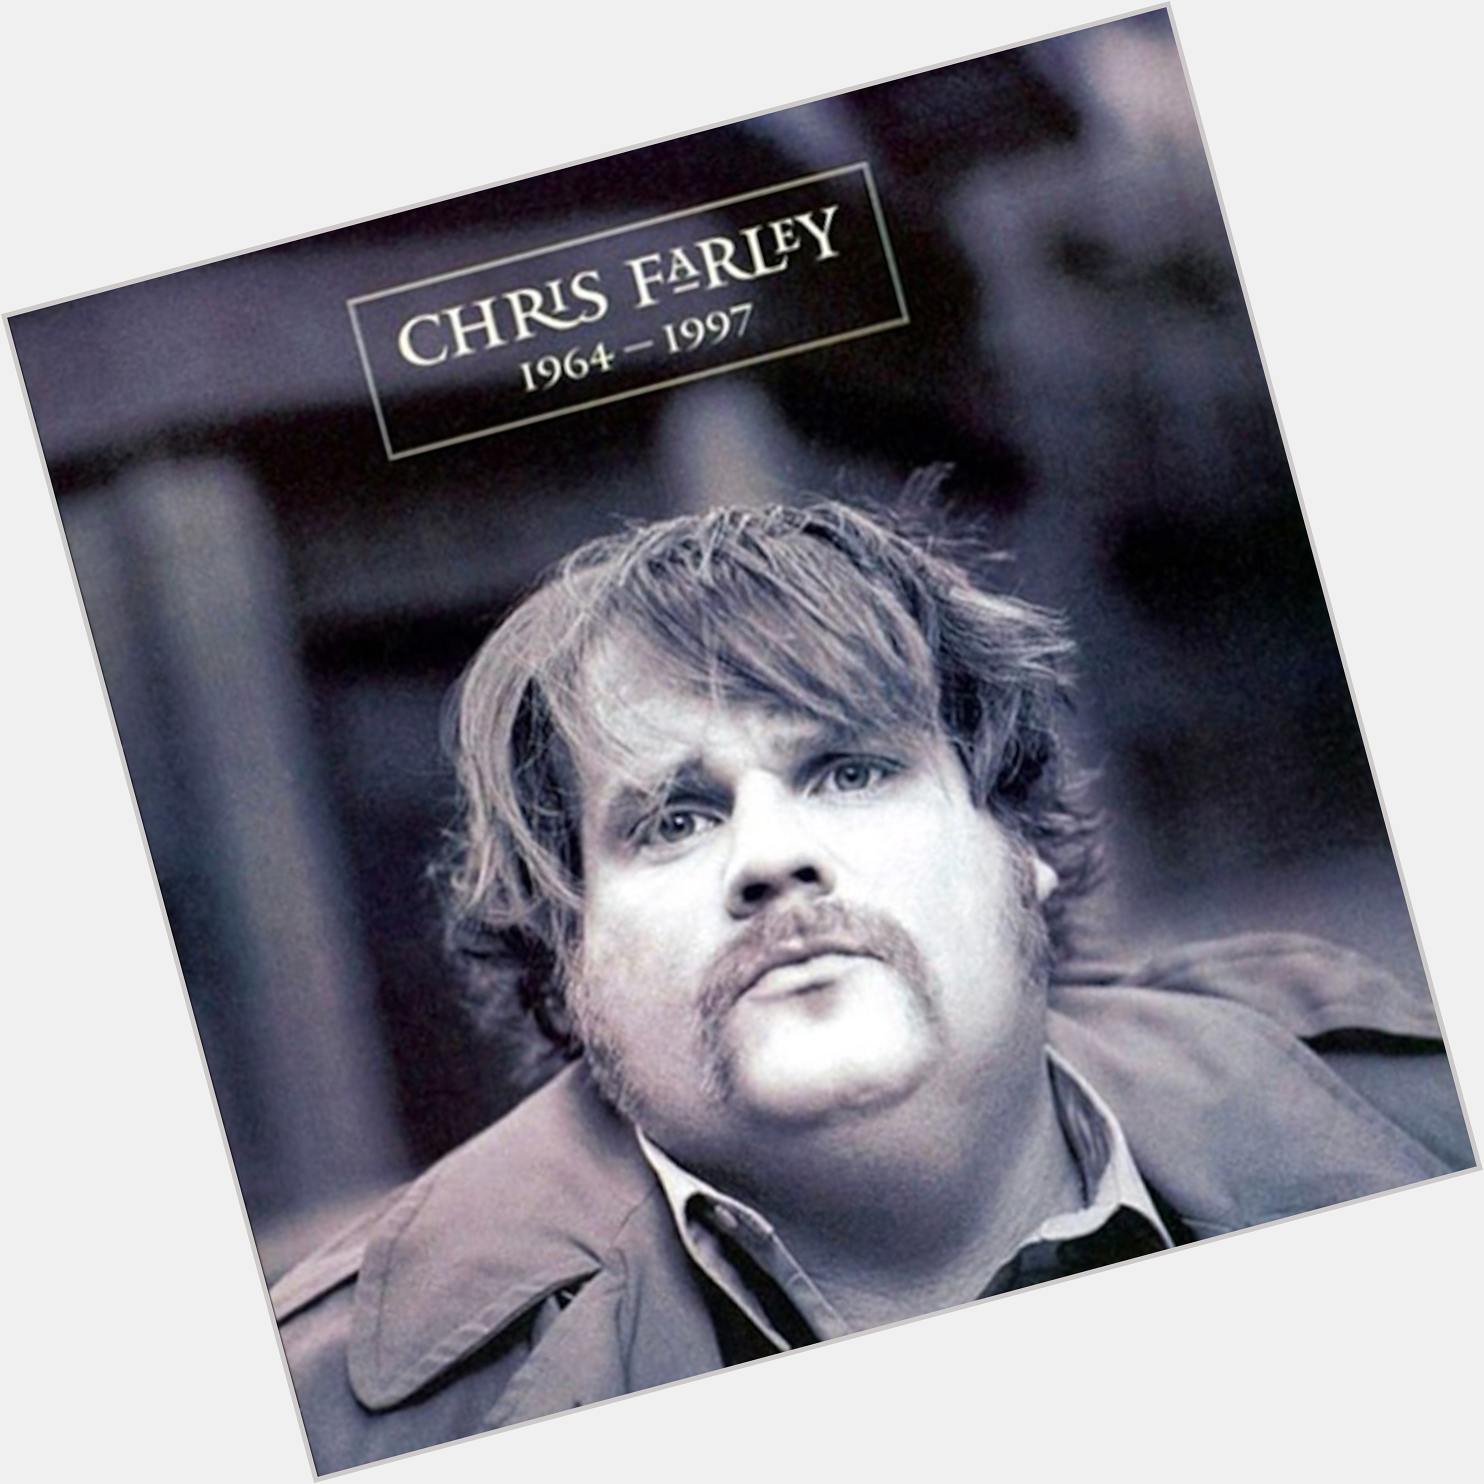 Happy birthday Chris Farley, Today marks what would have been the legends 58th birthday. We miss you Chris 